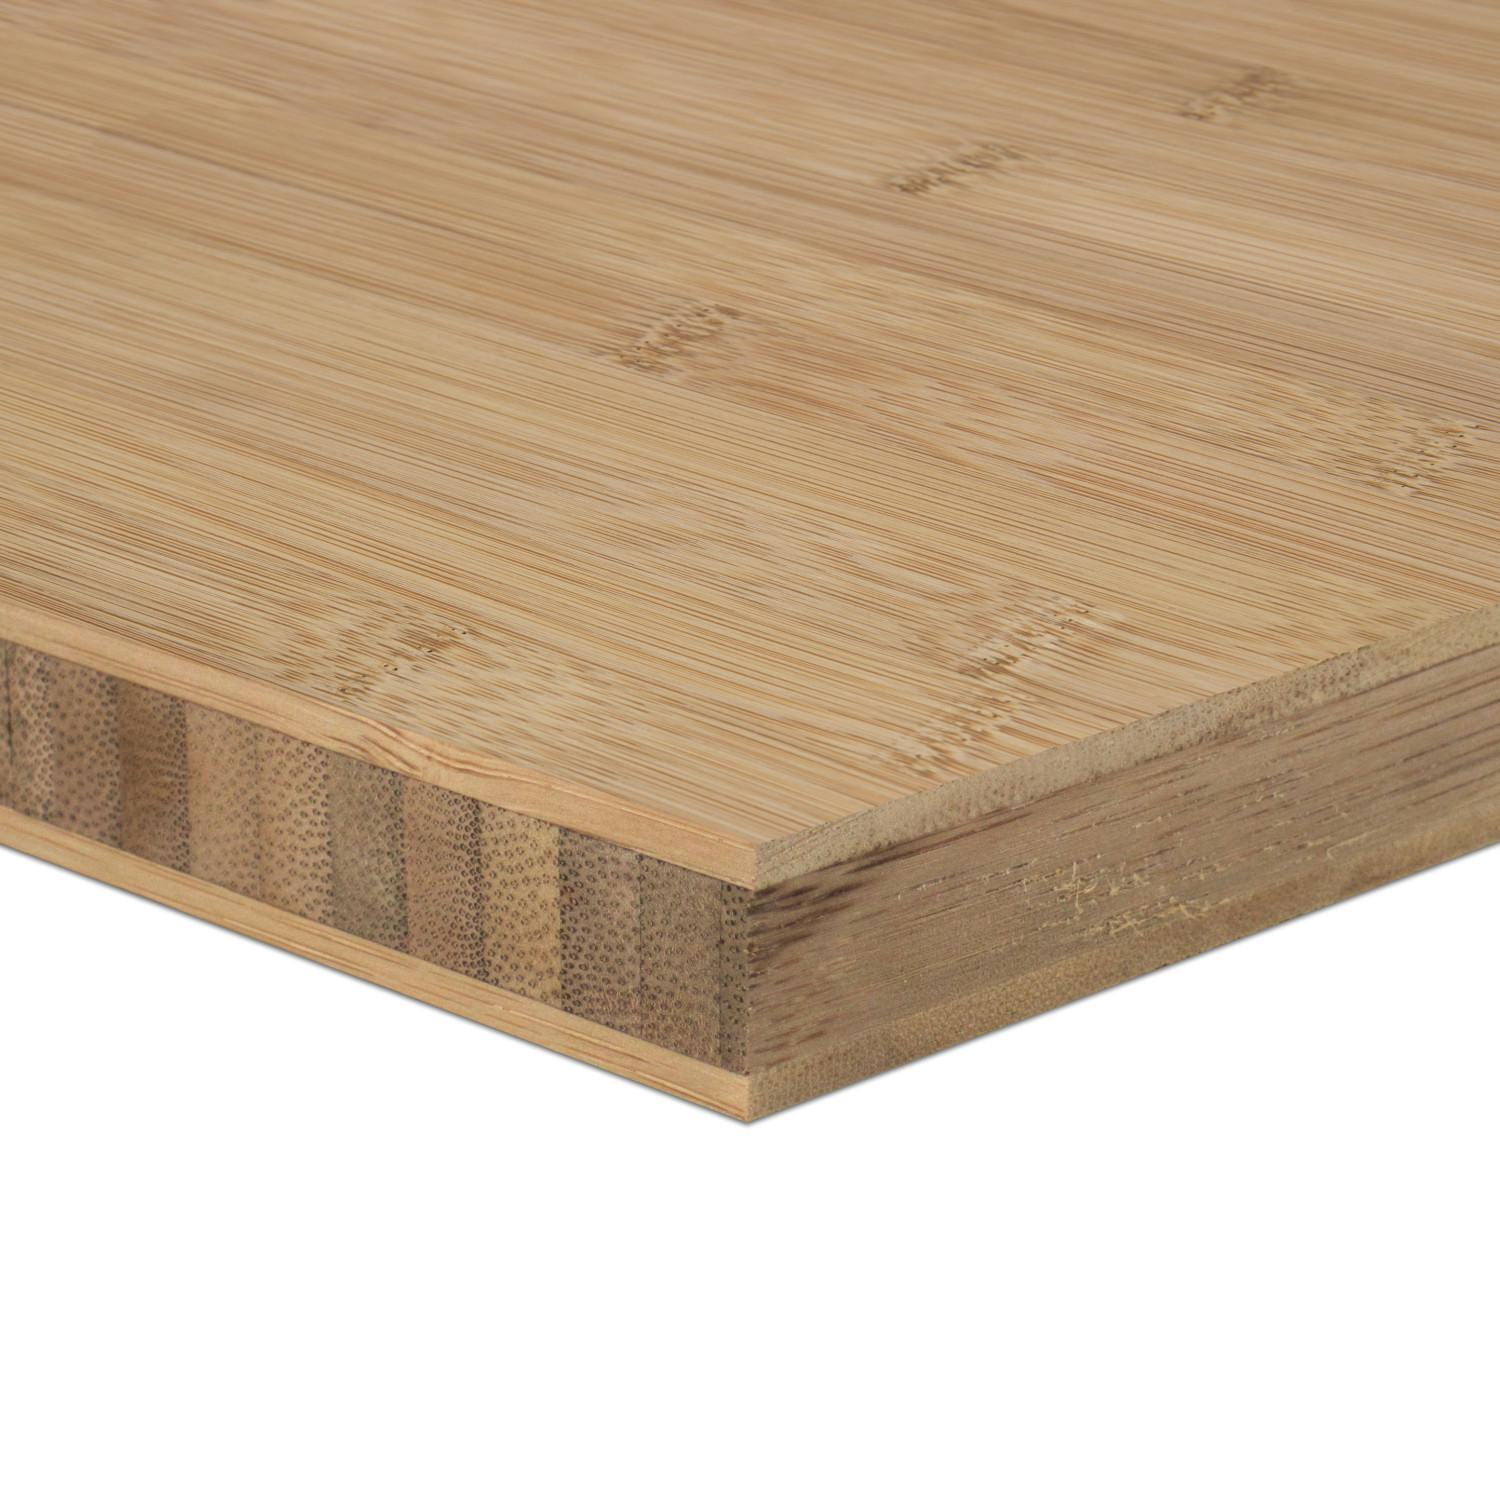 SPECIAL ORDER Bamboo Plywood - 3ply 3/4 in. Horizontal Carbonized